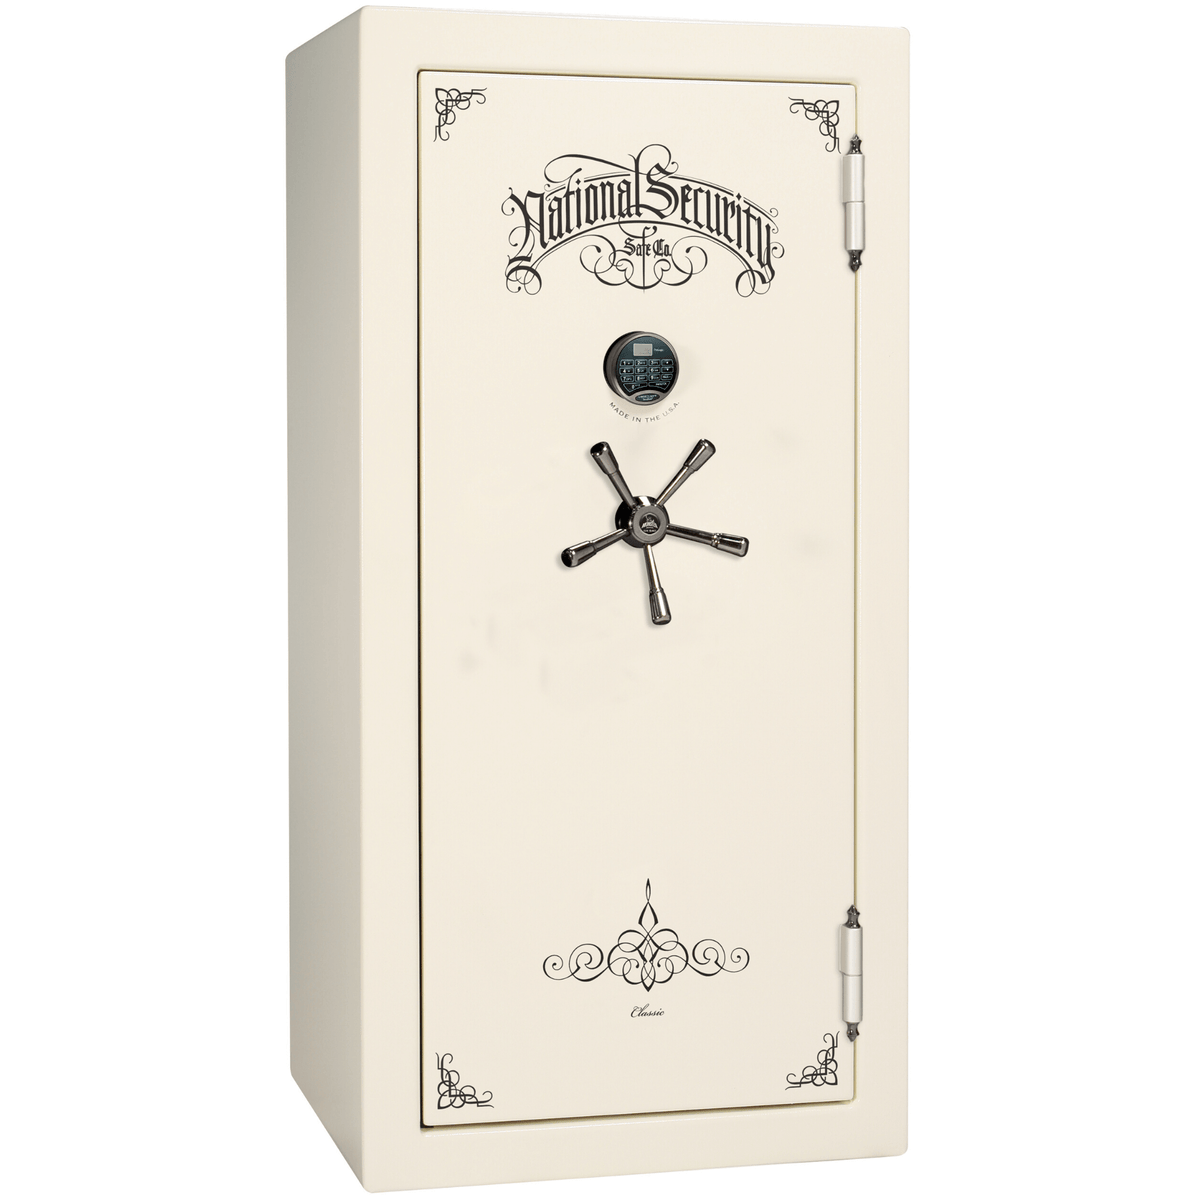 Liberty Safe Classic Plus 25 in White Marble with Black Chrome Electronic Lock, closed door.